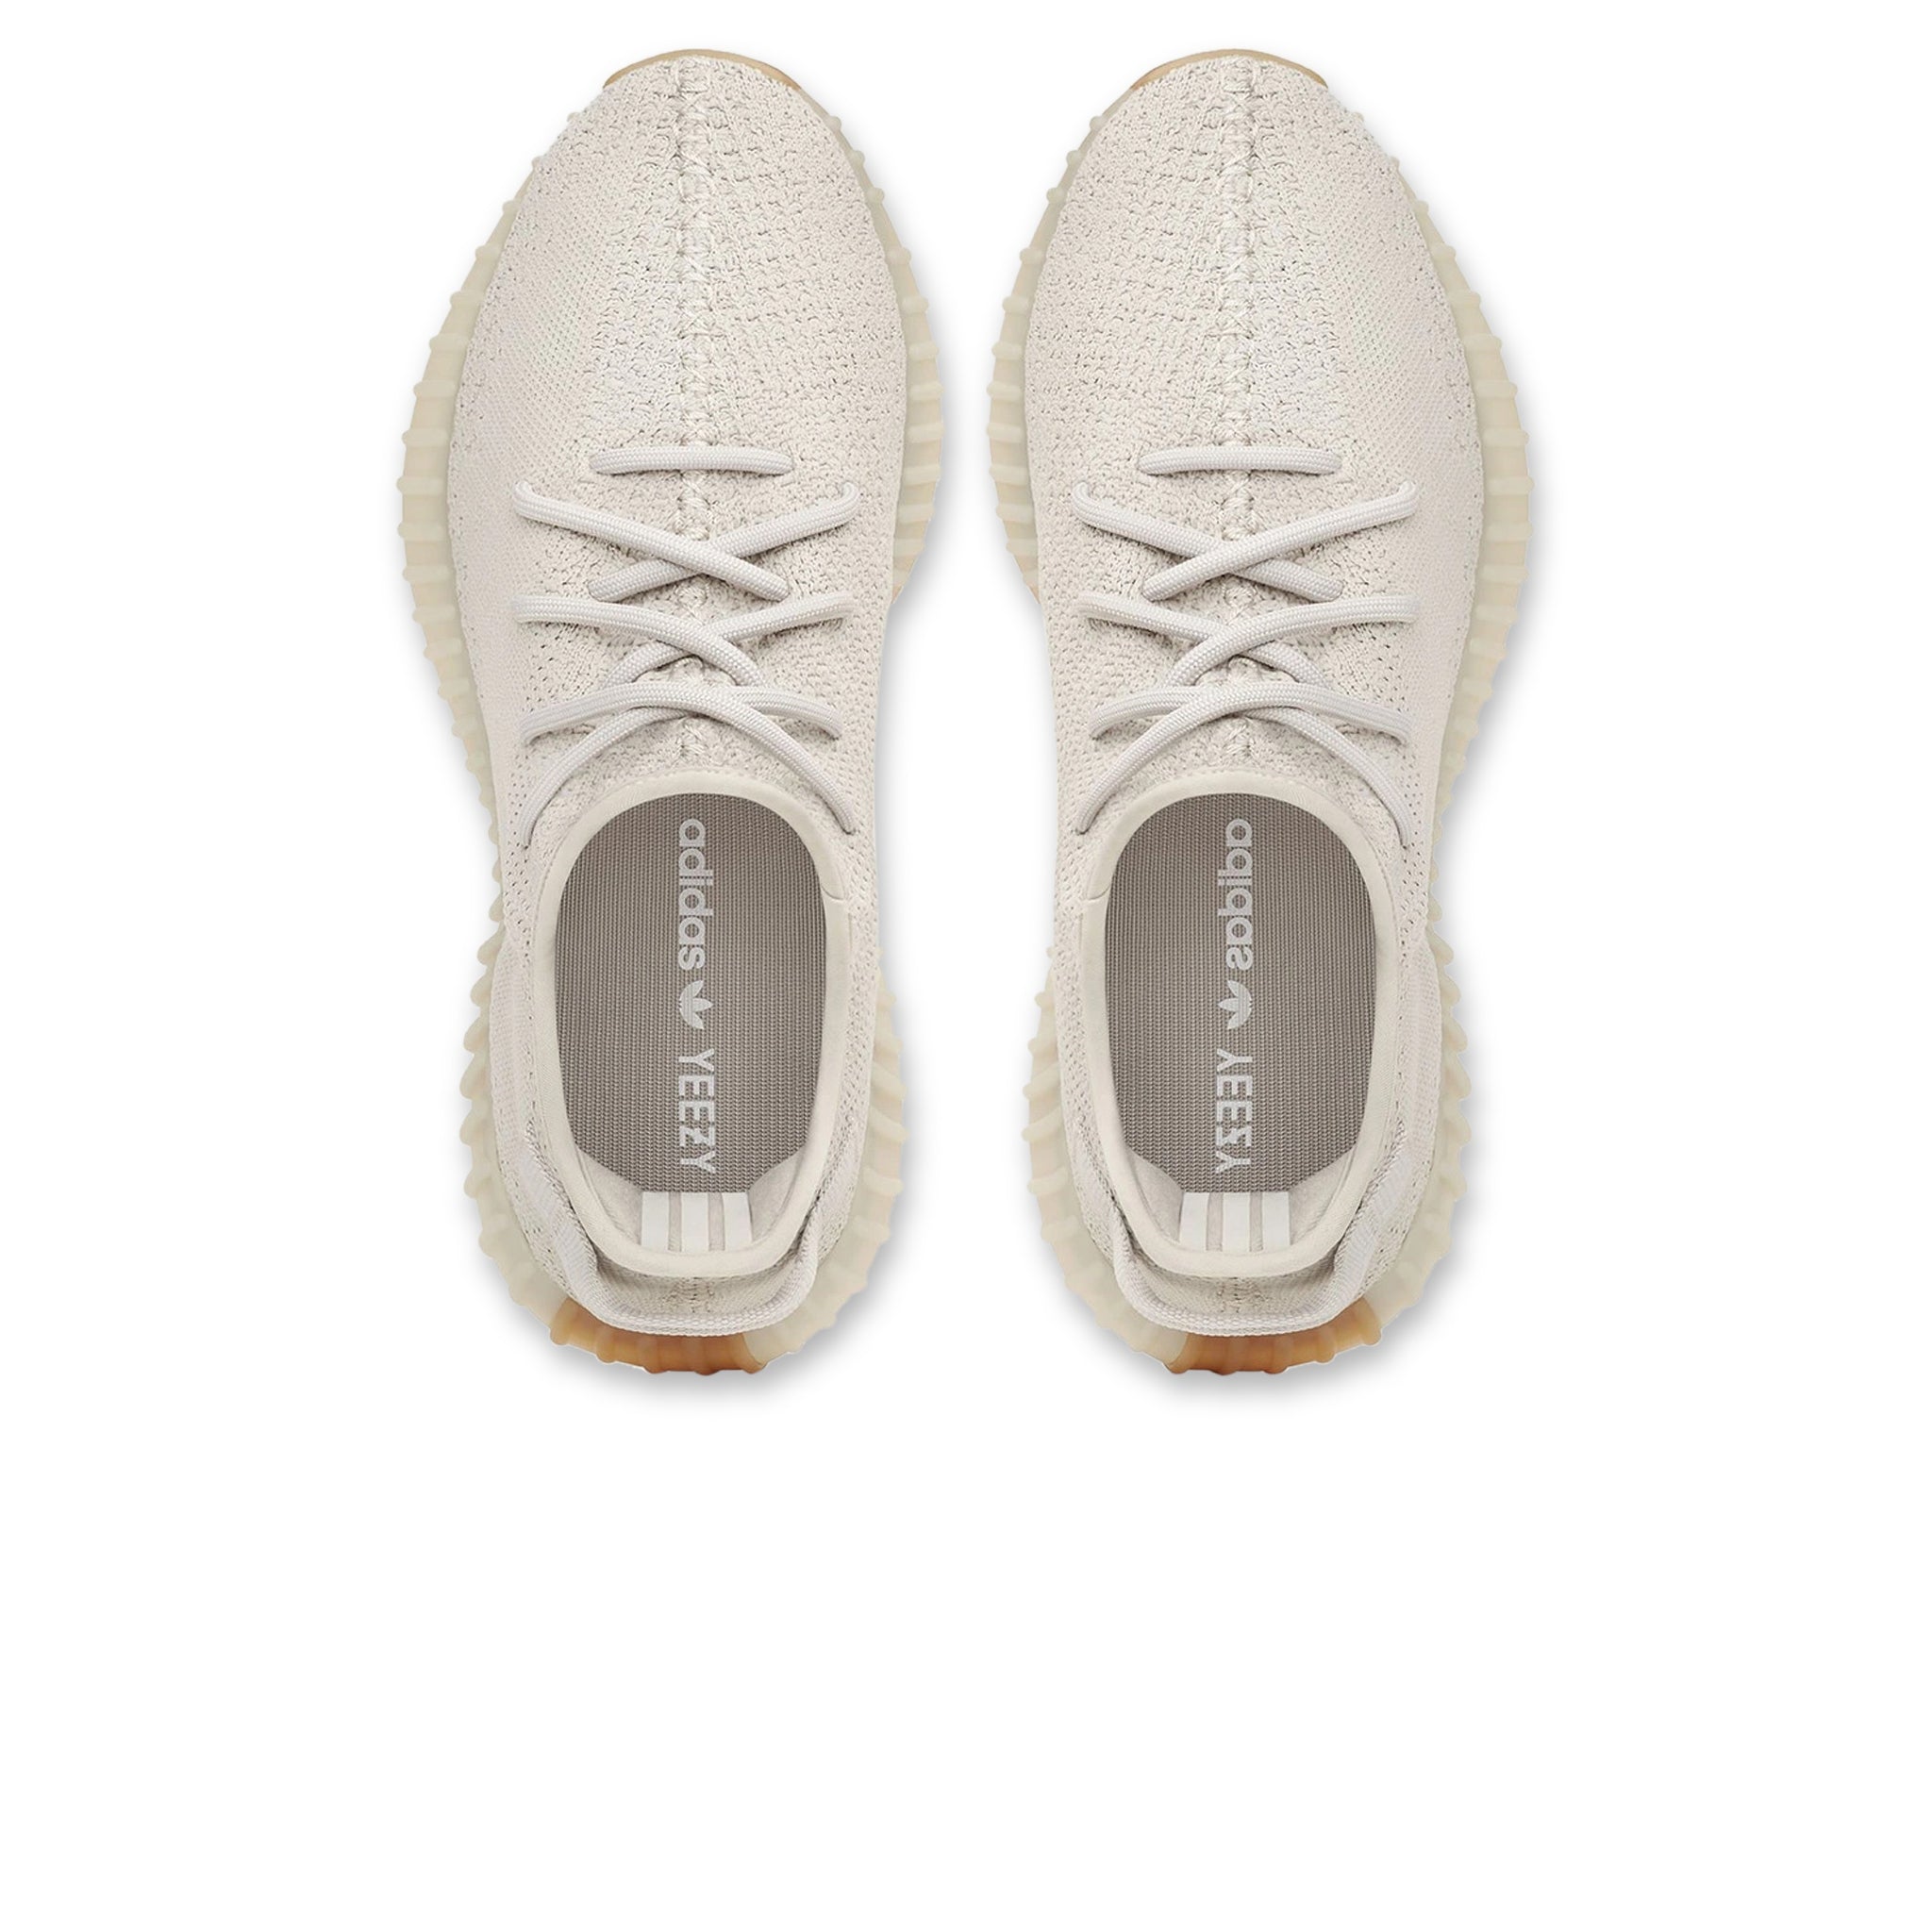 Top view of Adidas Yeezy Boost 350 V2 Sesame F99710